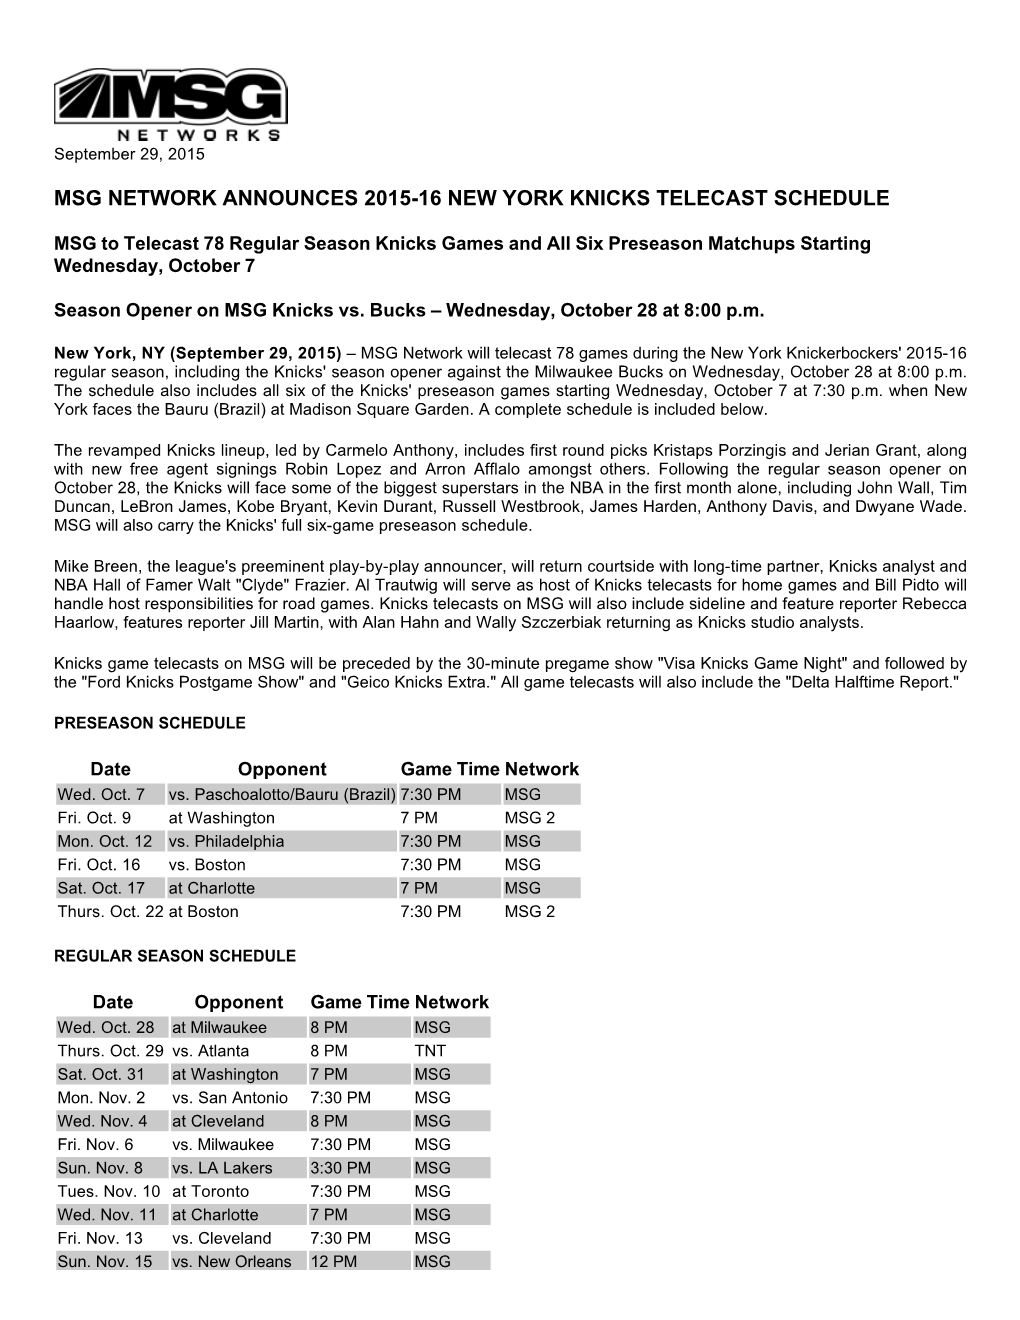 Msg Network Announces 2015-16 New York Knicks Telecast Schedule